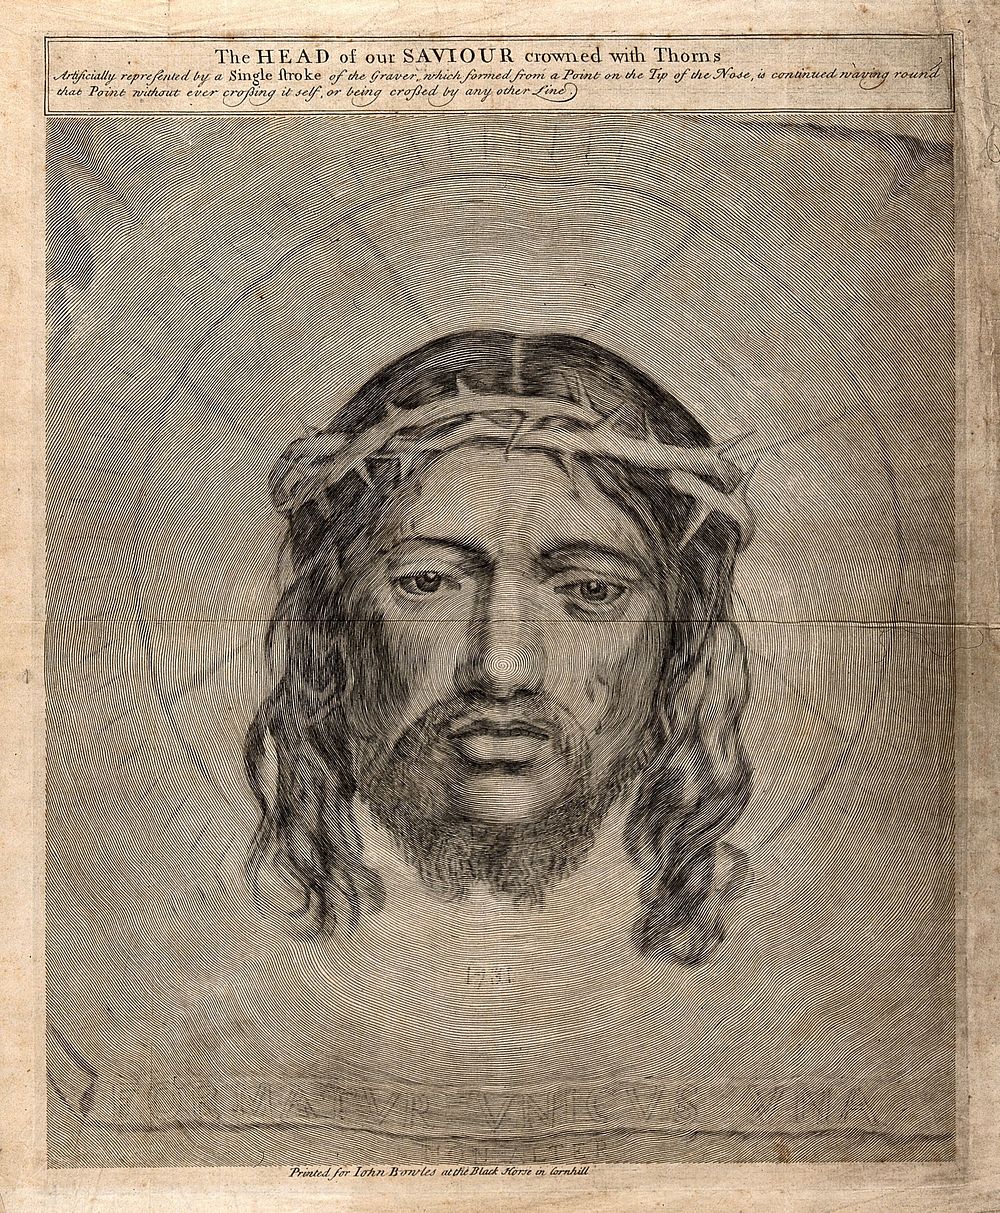 The veronica (sudarium of Saint Veronica), representing the face of Christ. Etching, 17--, after C. Mellan, 1649.